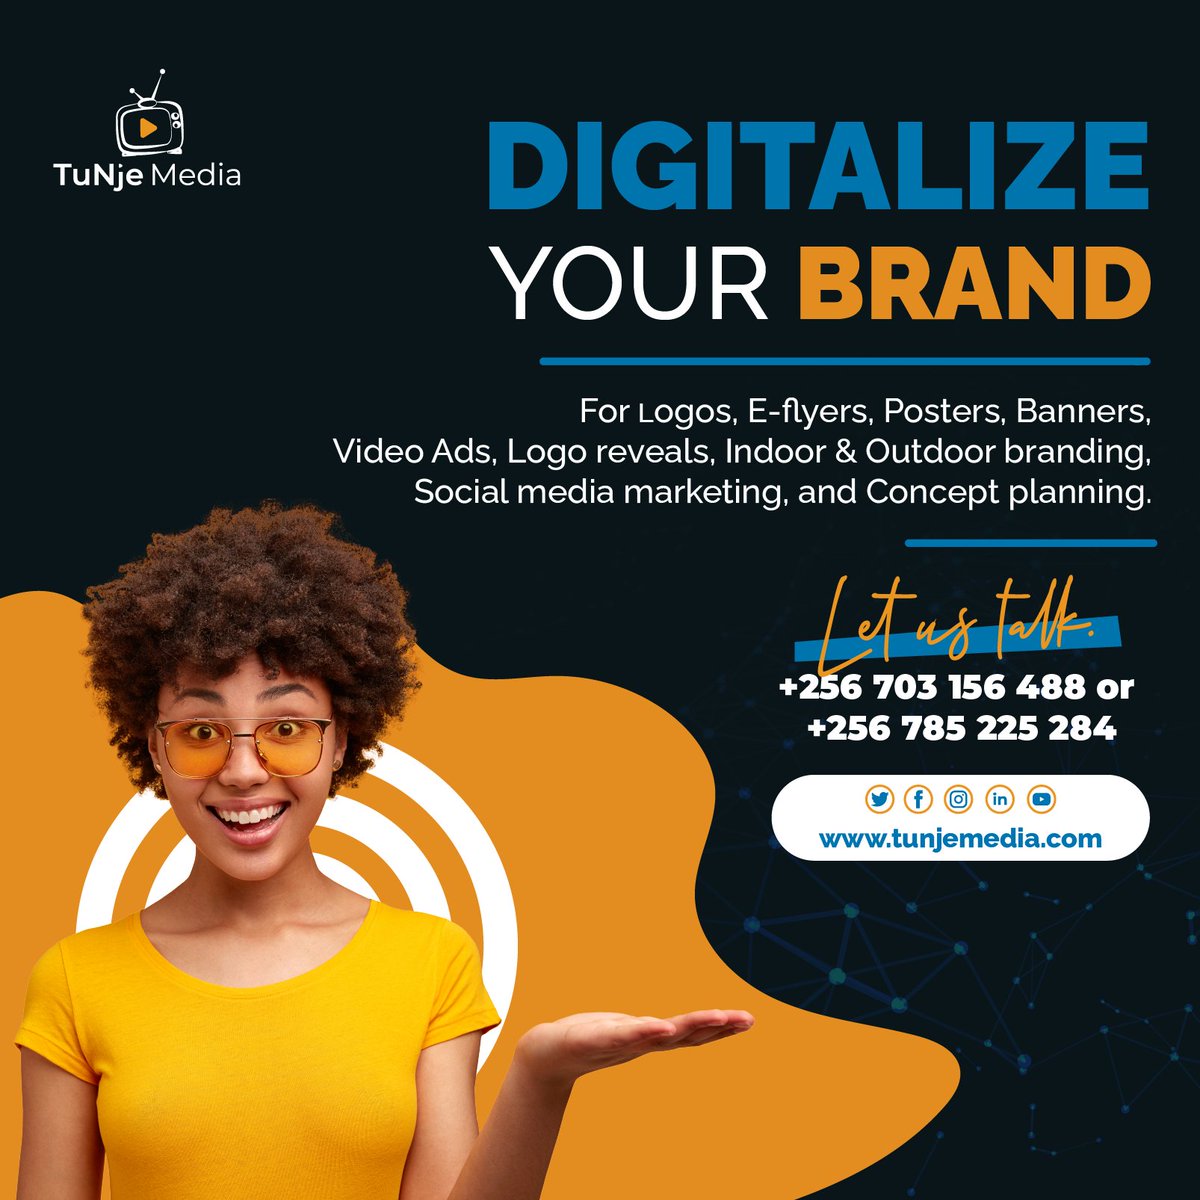 Branding helps you stand out in a saturated market.

Let TuNje media help you stand out.

tunjemedia@gmail.com
tunjemedia.com
#brandingservices
#videographyservices